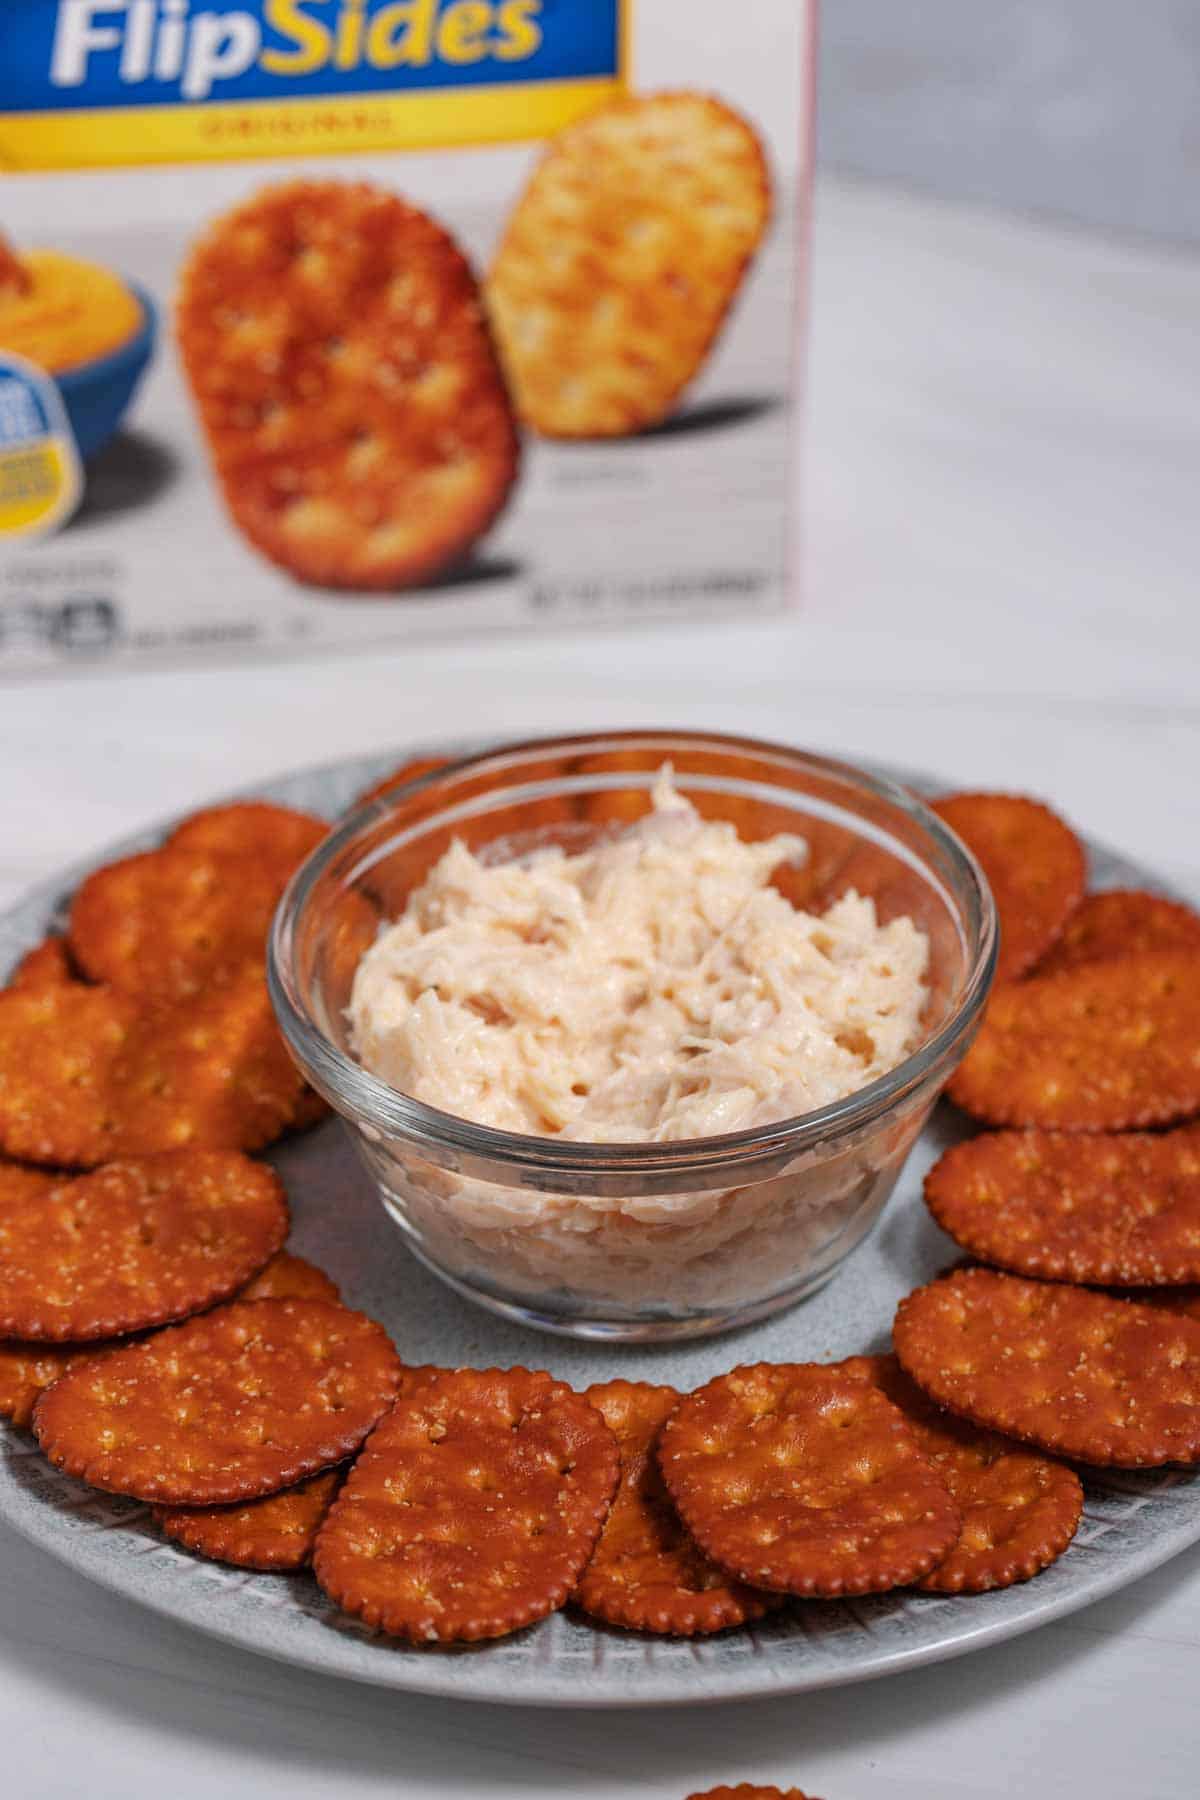 Plate of FlipSides crackers with a bowl of chicken salad in the middle.